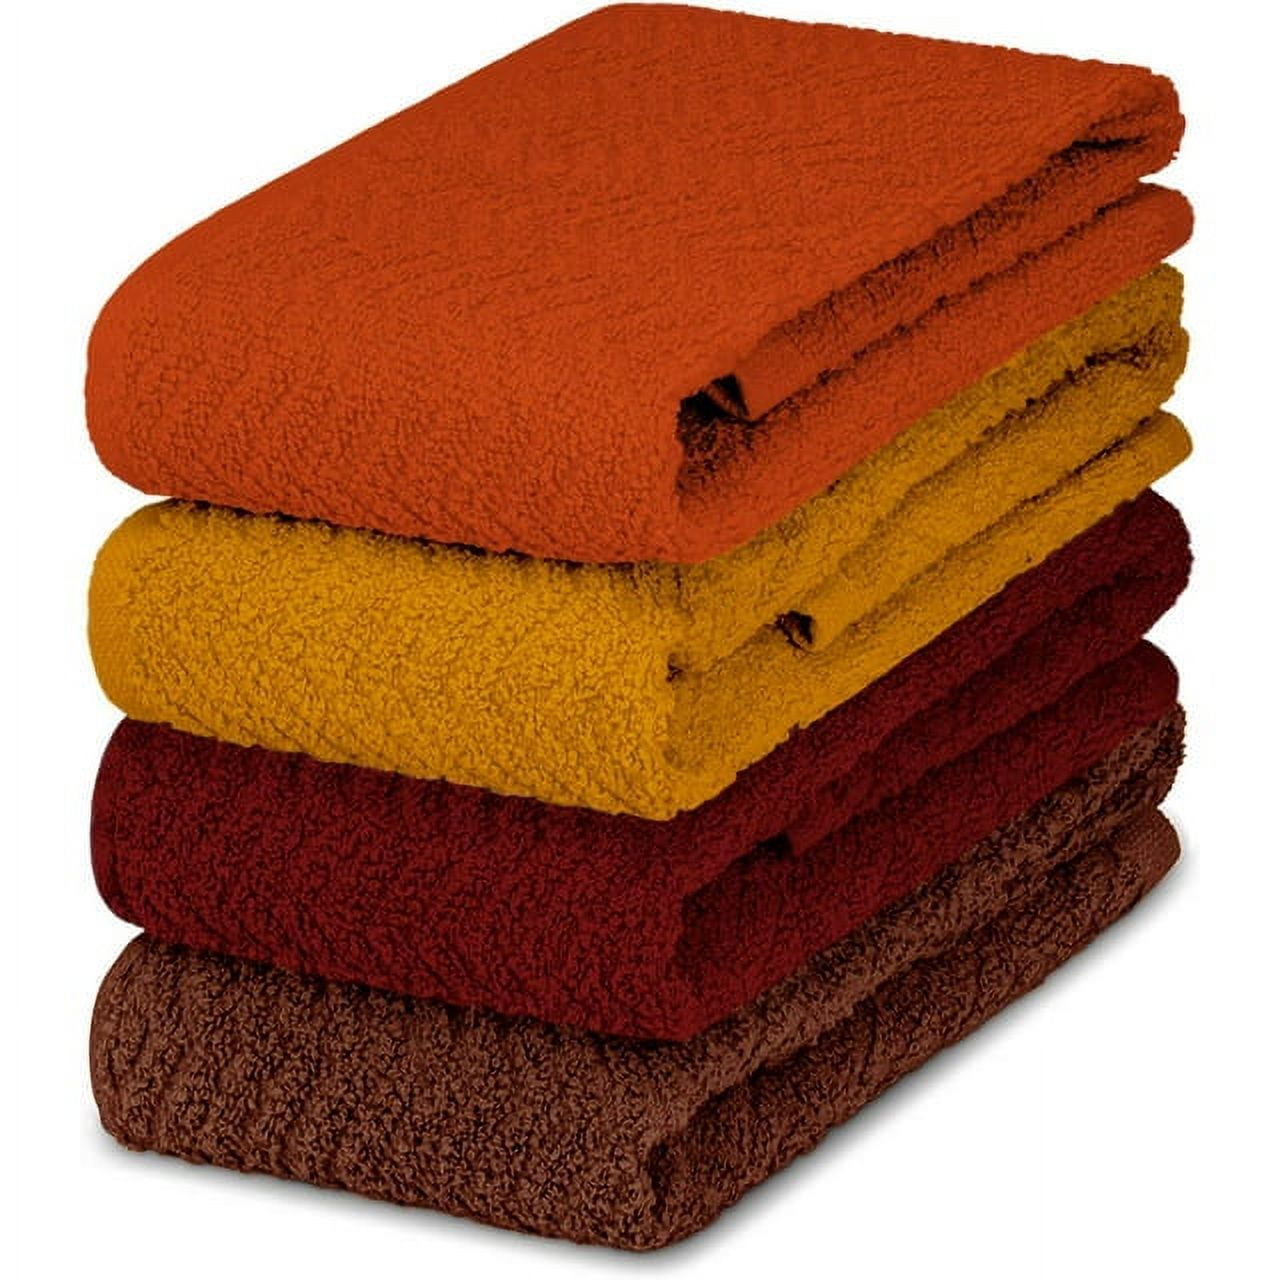 DecorRack 4 Large Kitchen Towels, 100% Cotton, 15 x 25 inches, Assorted ...